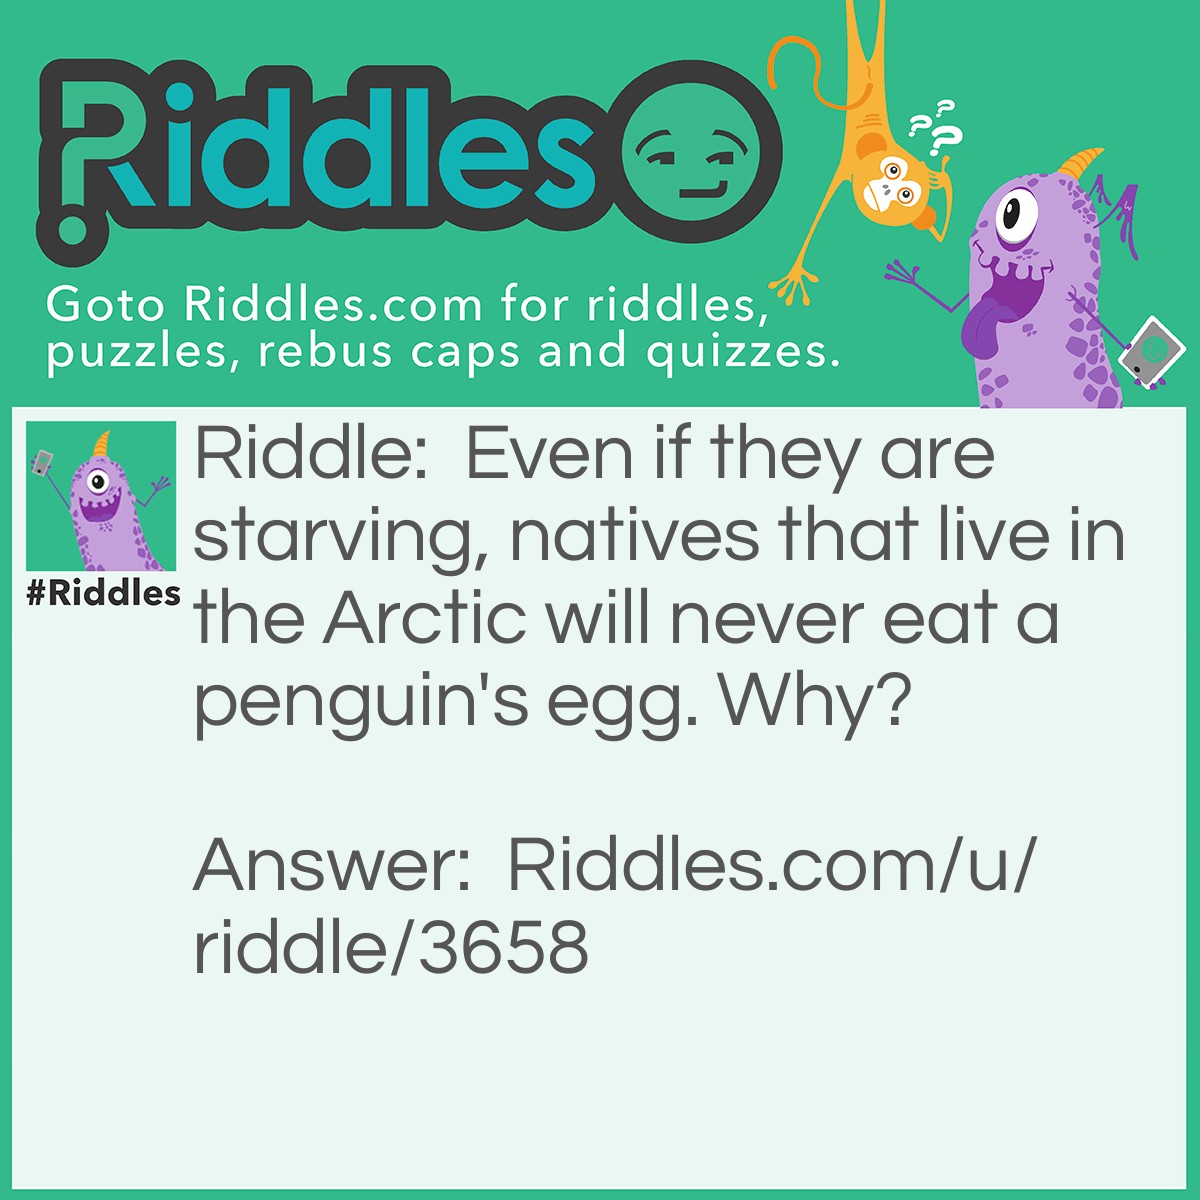 Riddle: Even if they are starving, natives that live in the Arctic will never eat a penguin's egg. Why? Answer: Penguins don't live in the Arctic.